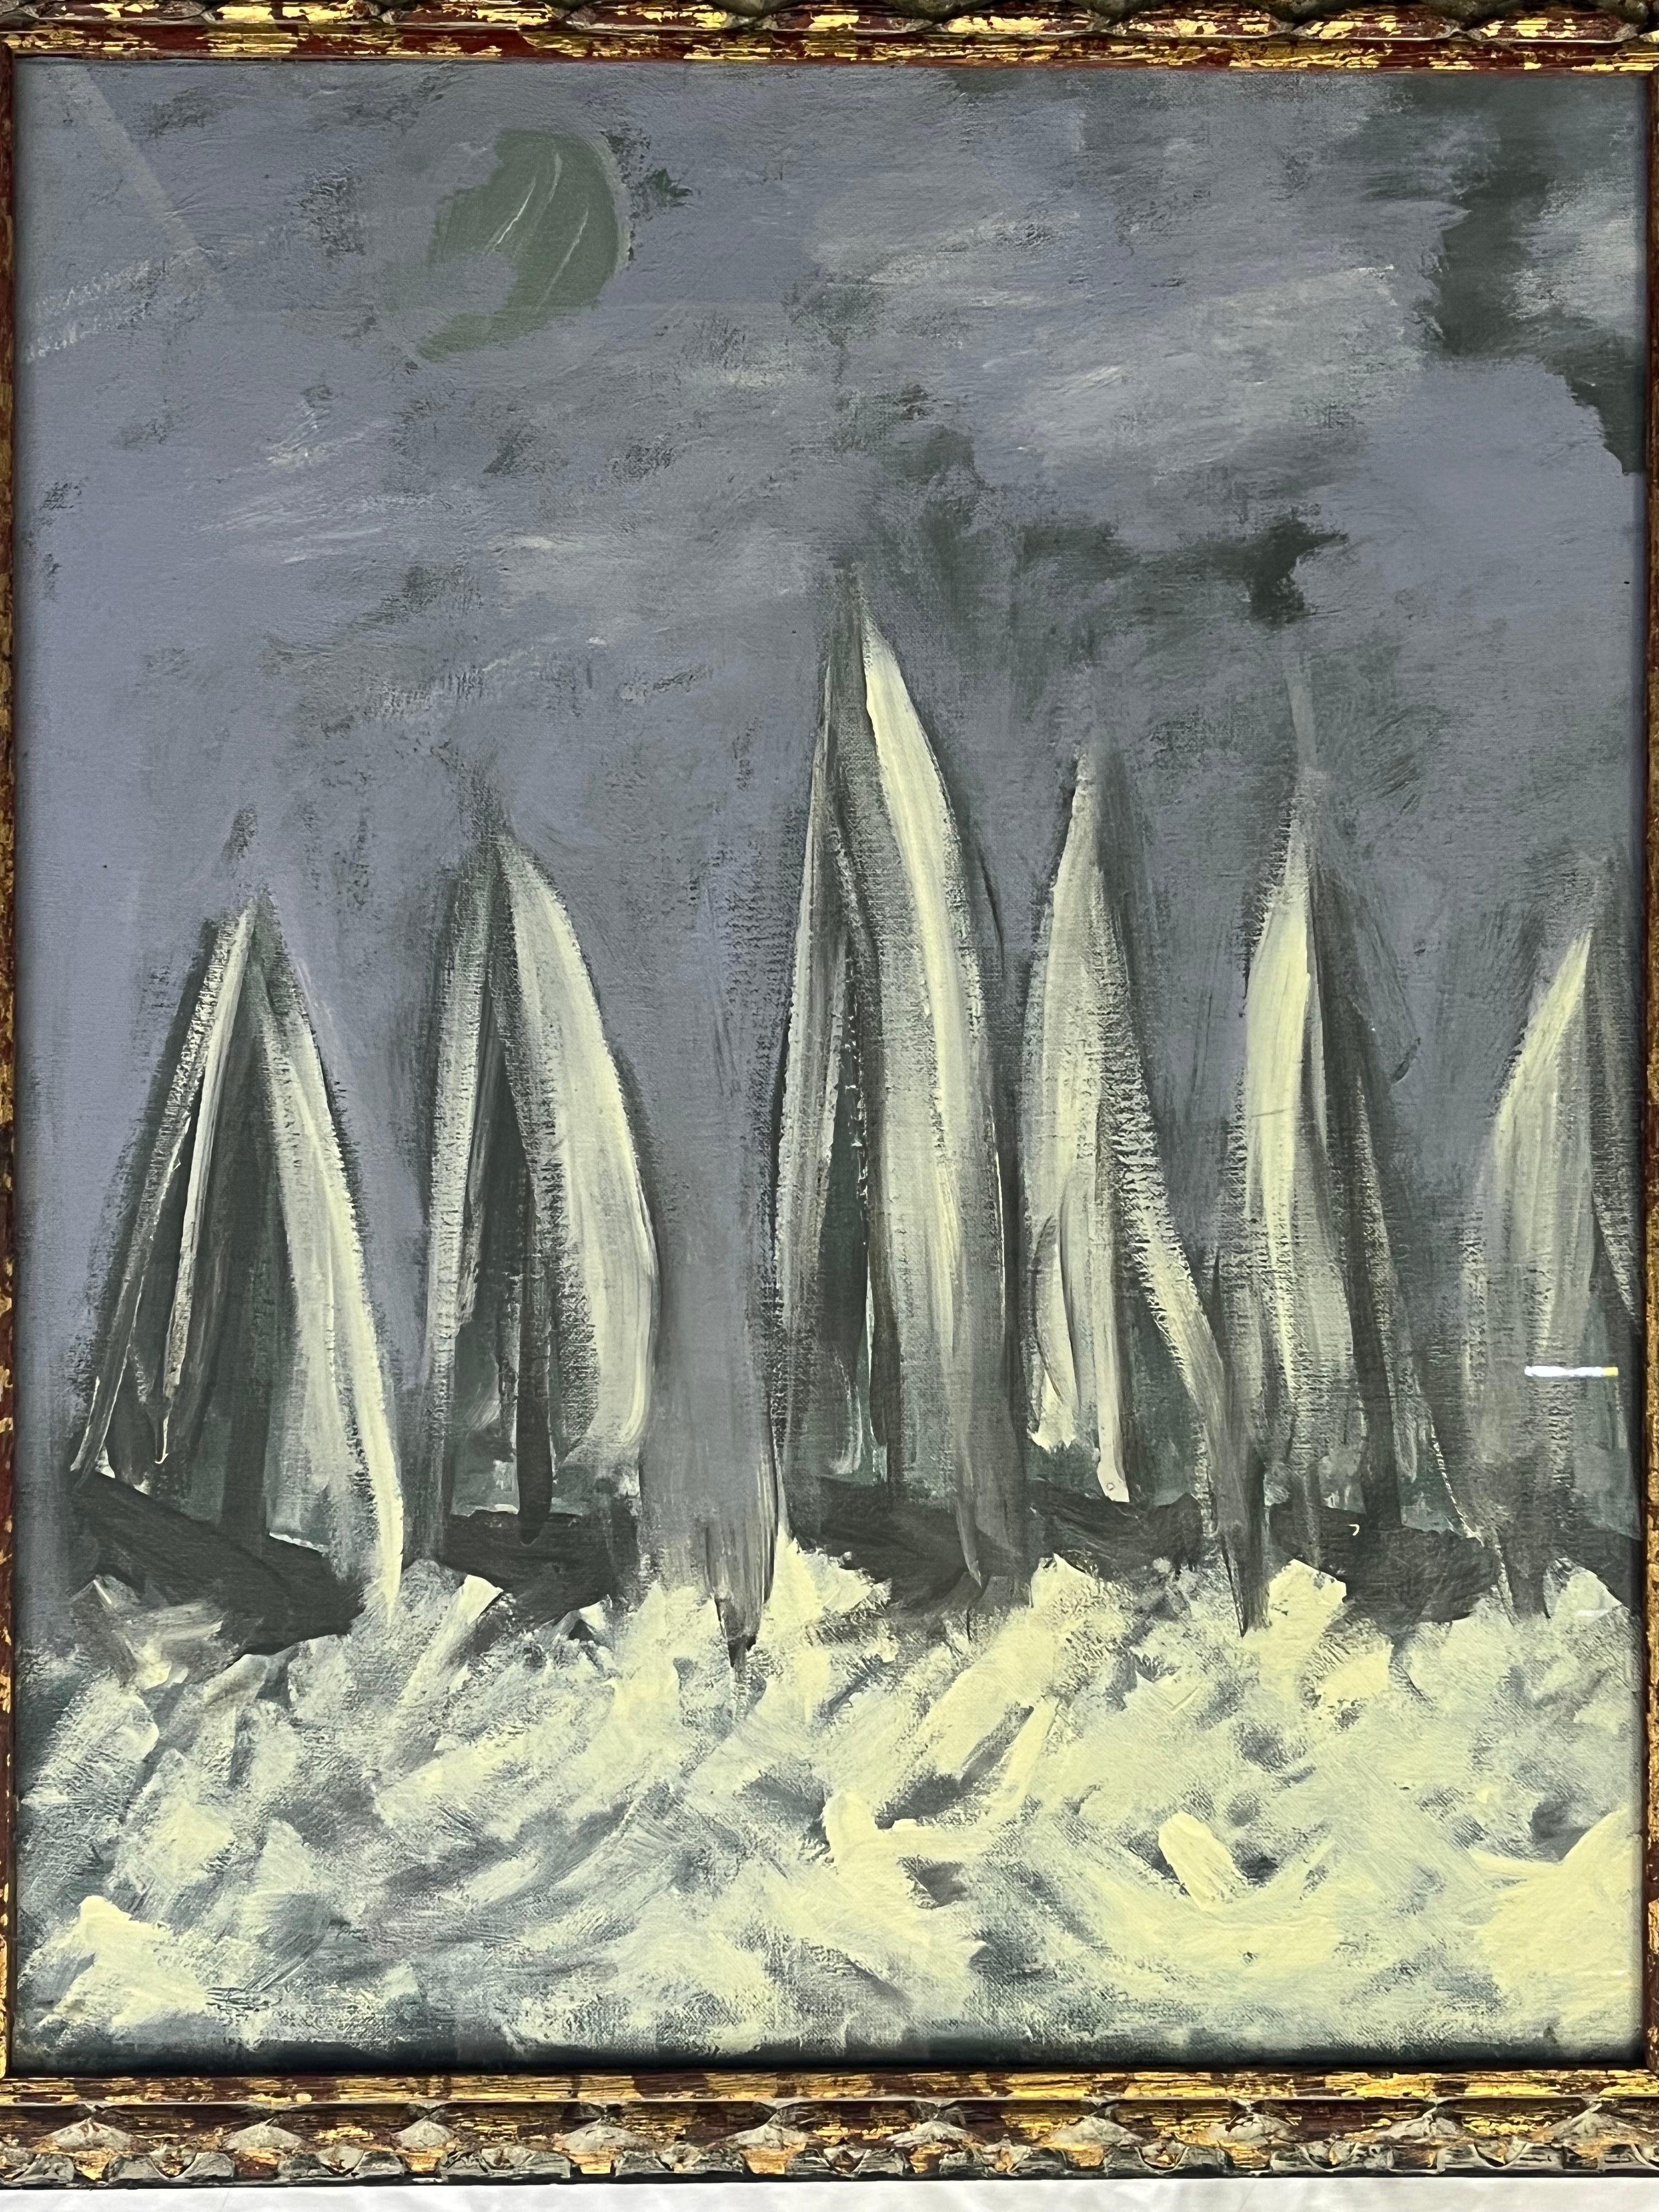 An energetic yet somehow serene mid century era circa 1960’s depiction of white sailboats set against blue skies sailing in a sea of white caps. This oil on canvas has a wood backing and is presented in a frame and under glass. The canvas is not